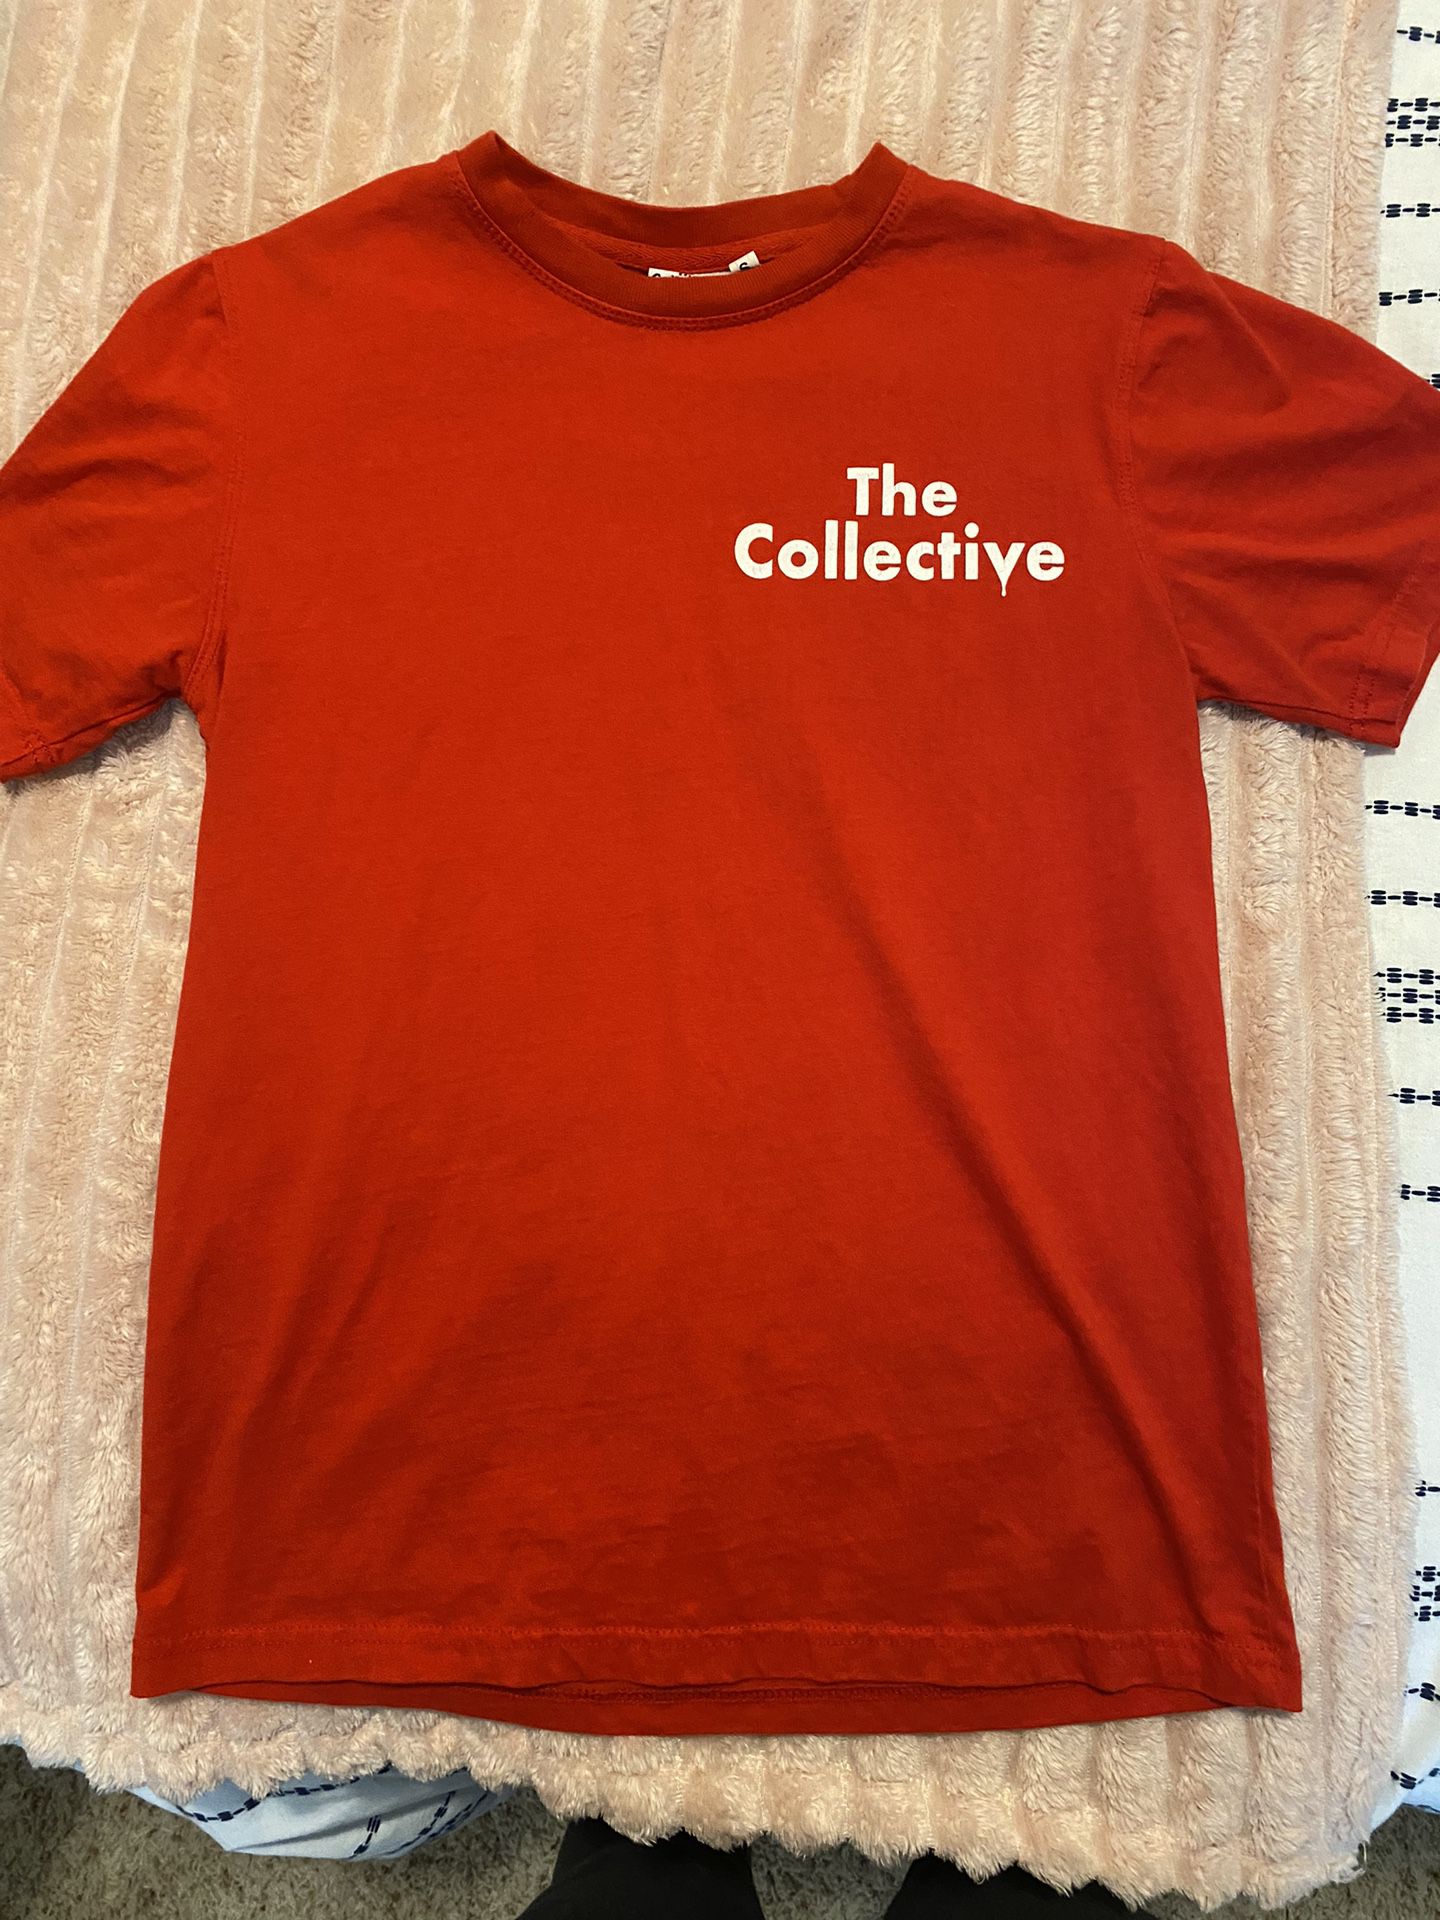 The Collective T-shirt